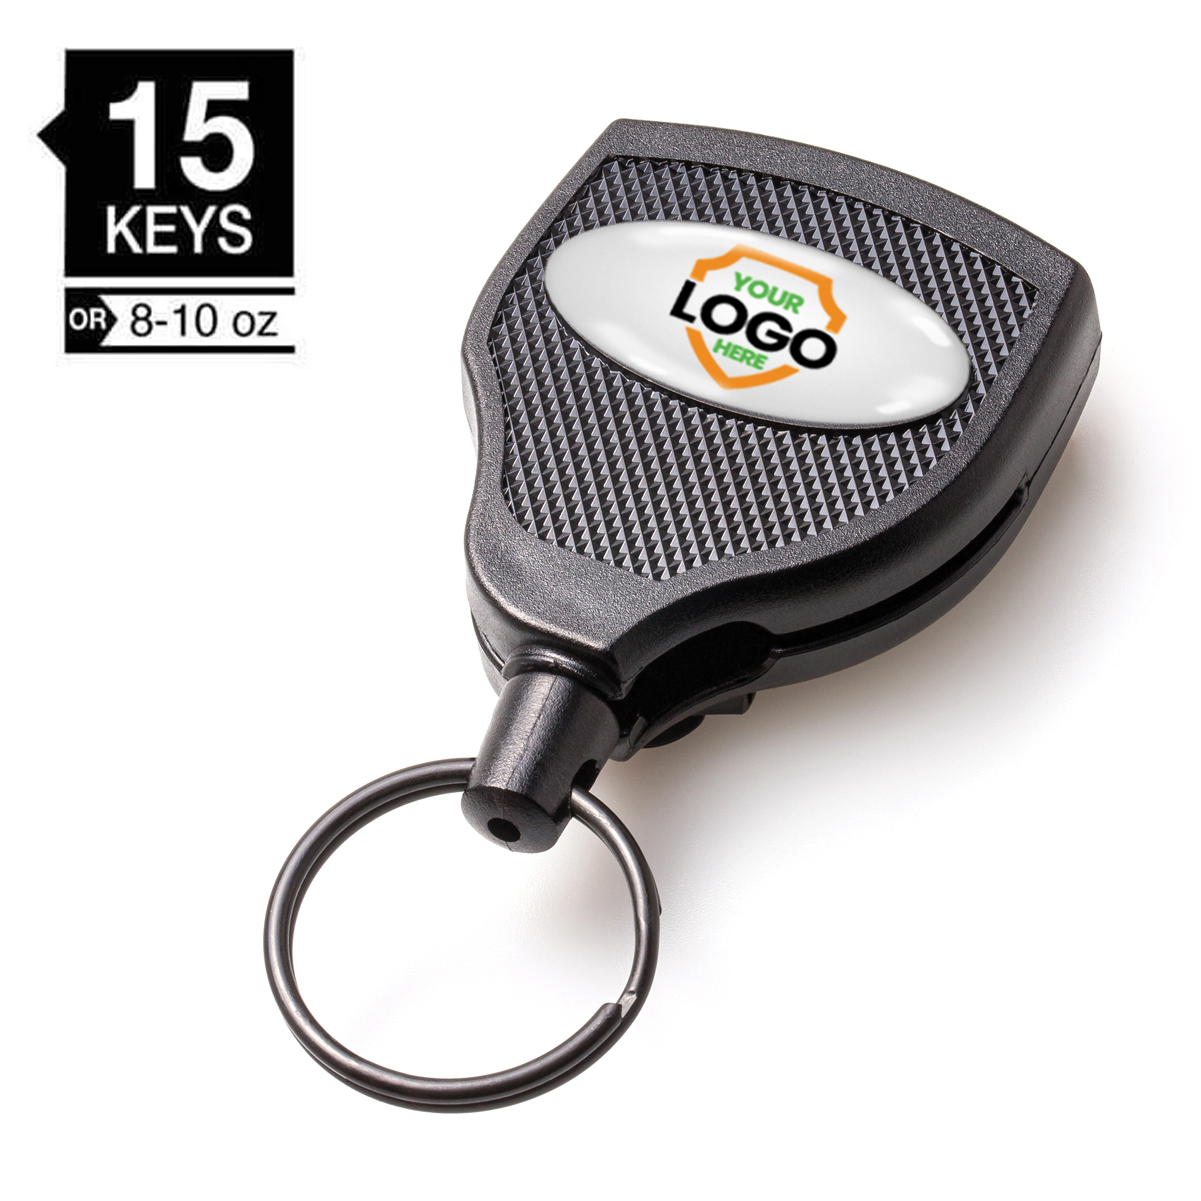 Customizable Key-Bak Super 48 Heavy Duty Key Reel (S48K) - Customize with Your Own Logo and Design